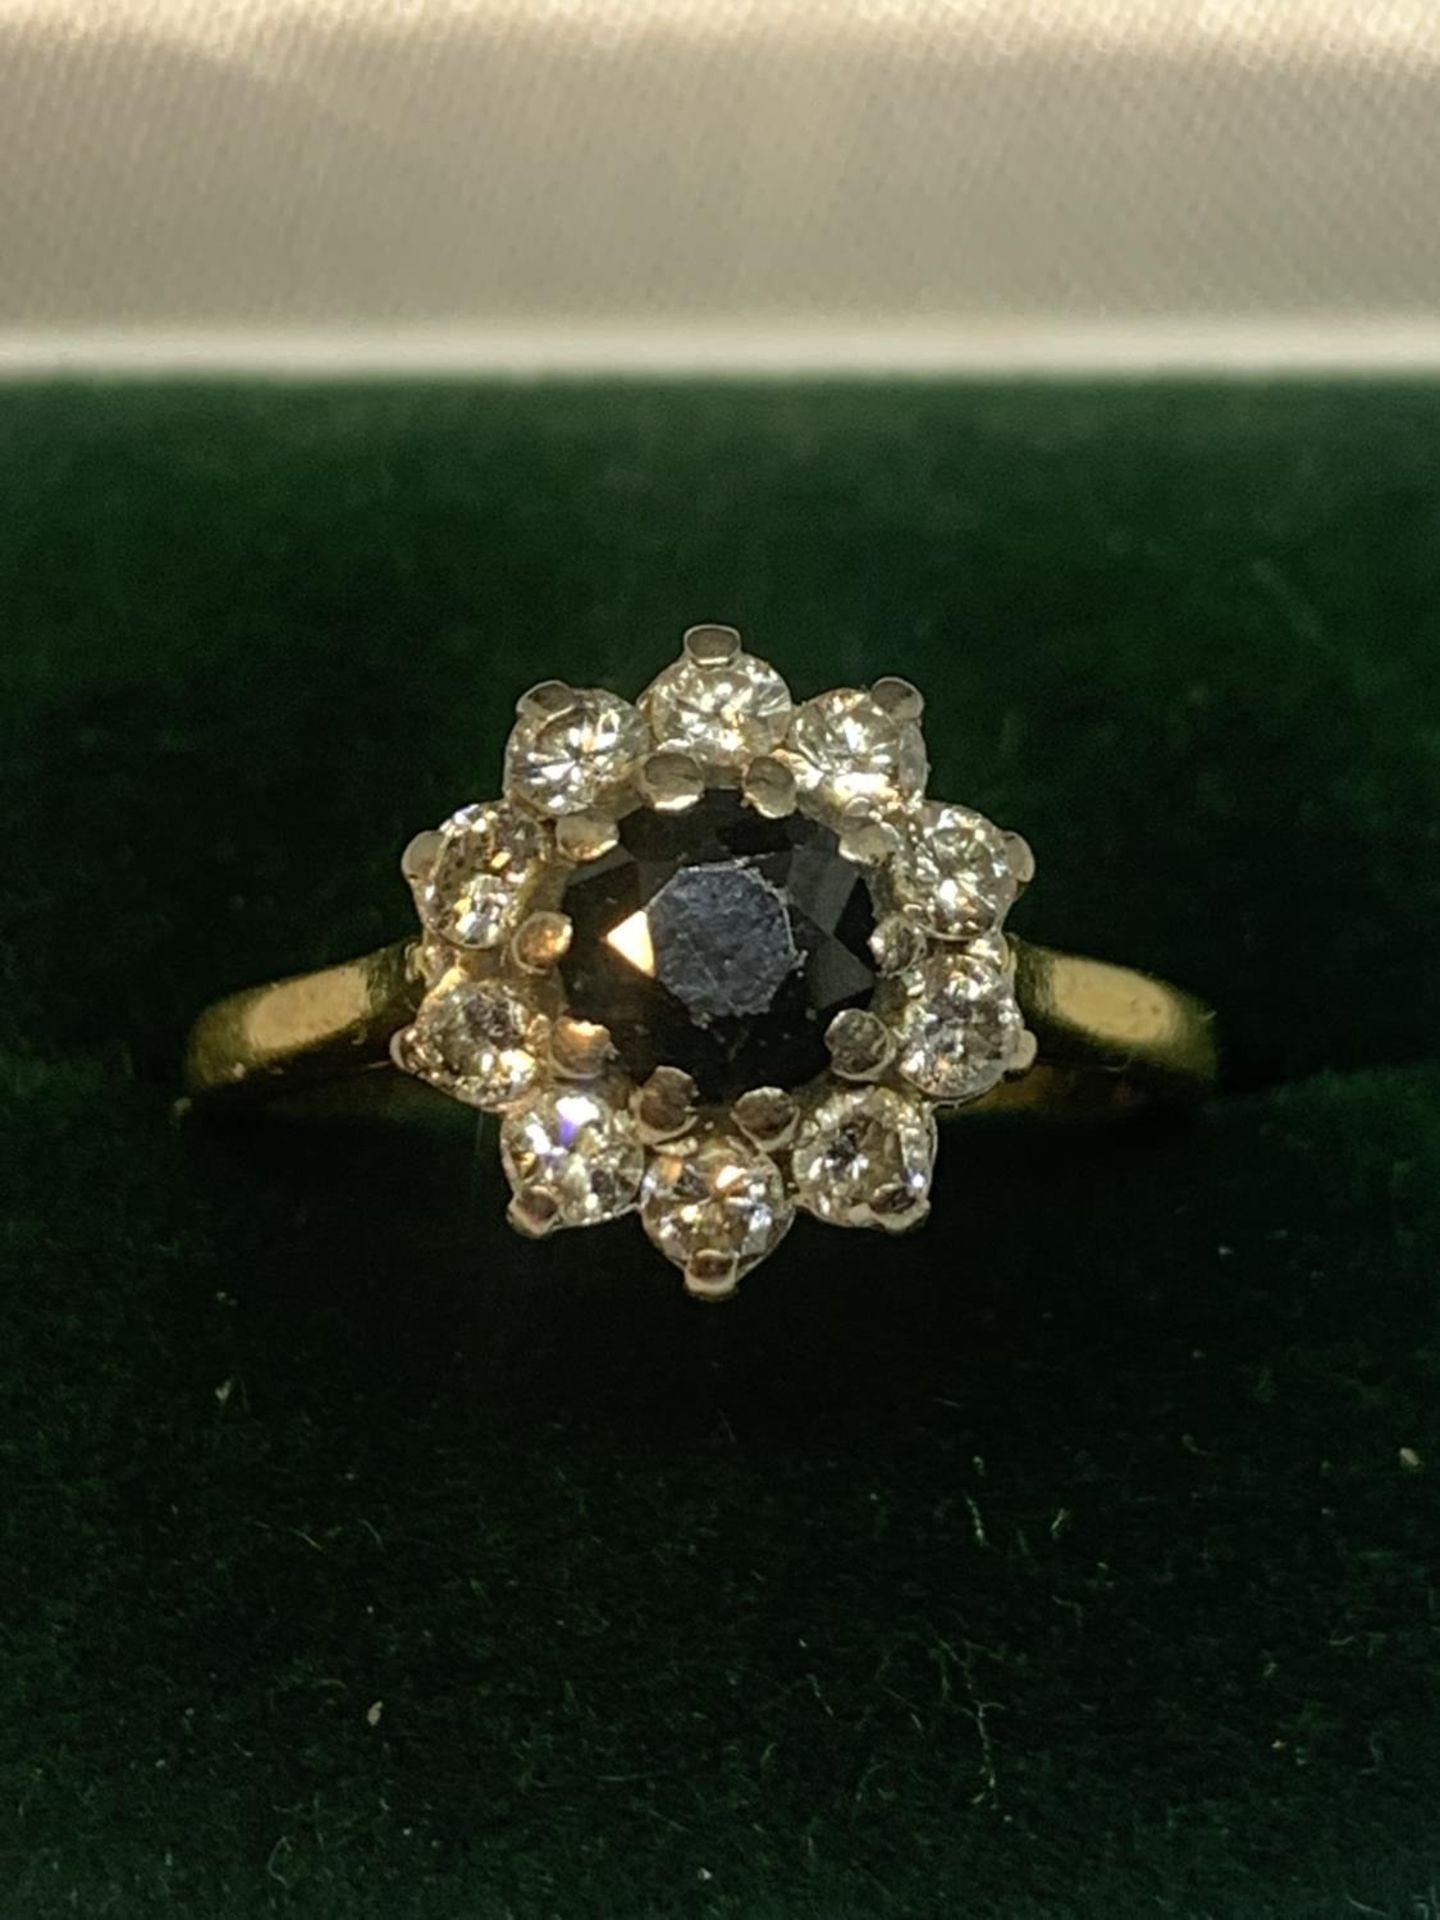 AN 18 CARAT GOLD RING WITH A CENTRE SAPPHIRE SURROUNDED BY DIAMONDS SIZE L IN A PRESENTATION BOX